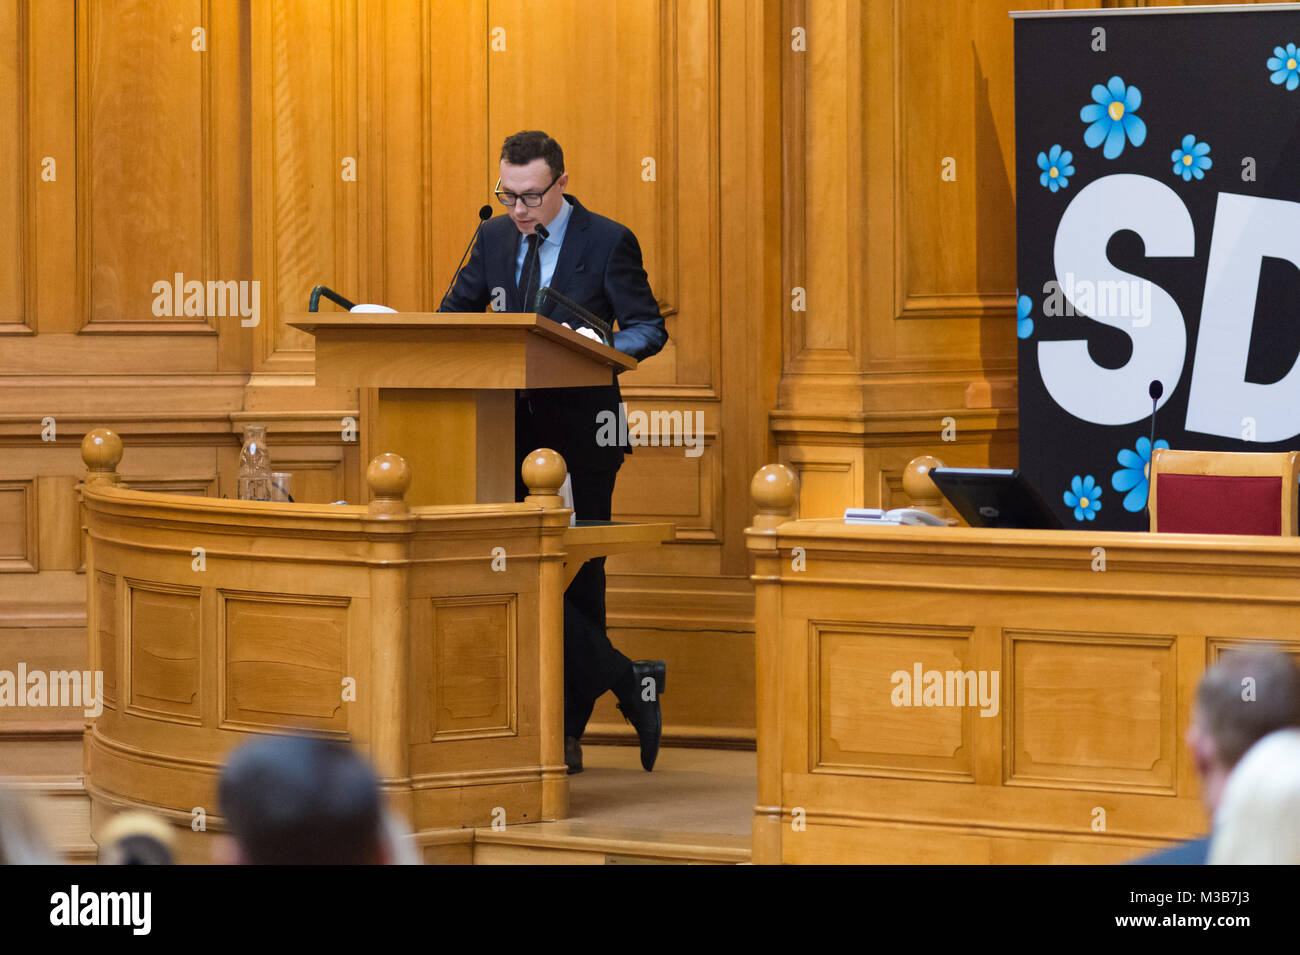 Stockholm, Sweden, 10th February, 2018. 'Future Conference' Sweden Democrats (SD) (Sverigedemokraterna) at the House of Parliament, Stockholm. Communications Manager Joakim Wallerstein speech on the importance of social media in parliamentary work. Stock Photo